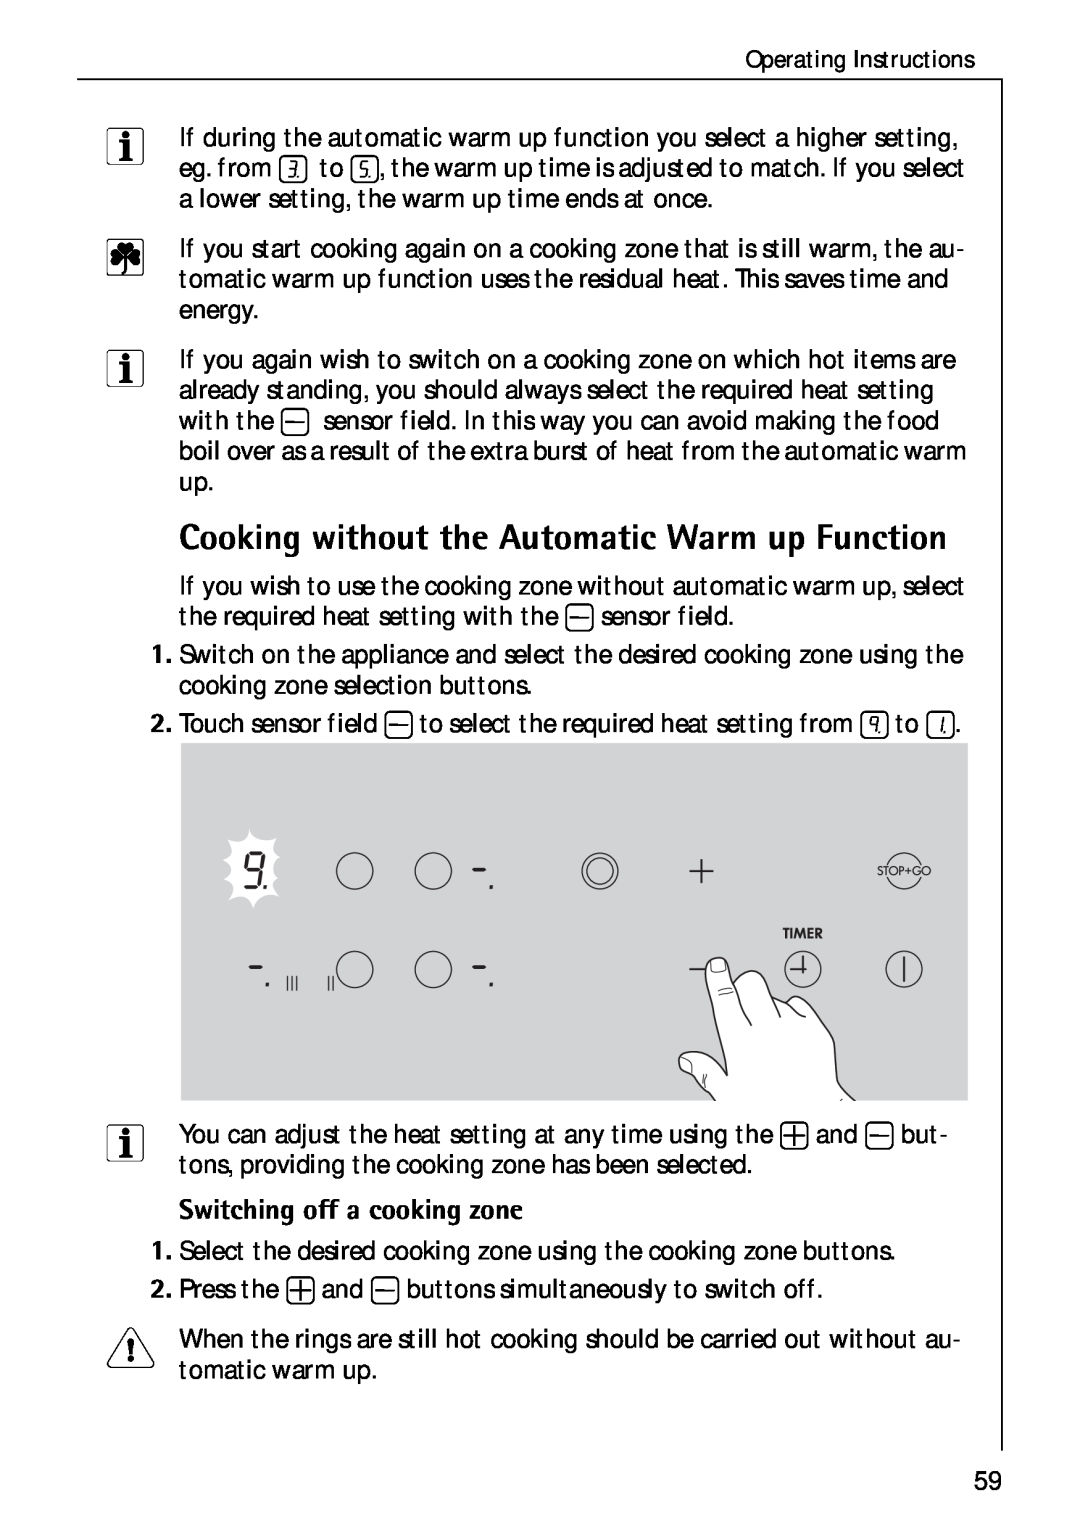 Electrolux C75301K operating instructions Cooking without the Automatic Warm up Function, Switching off a cooking zone 